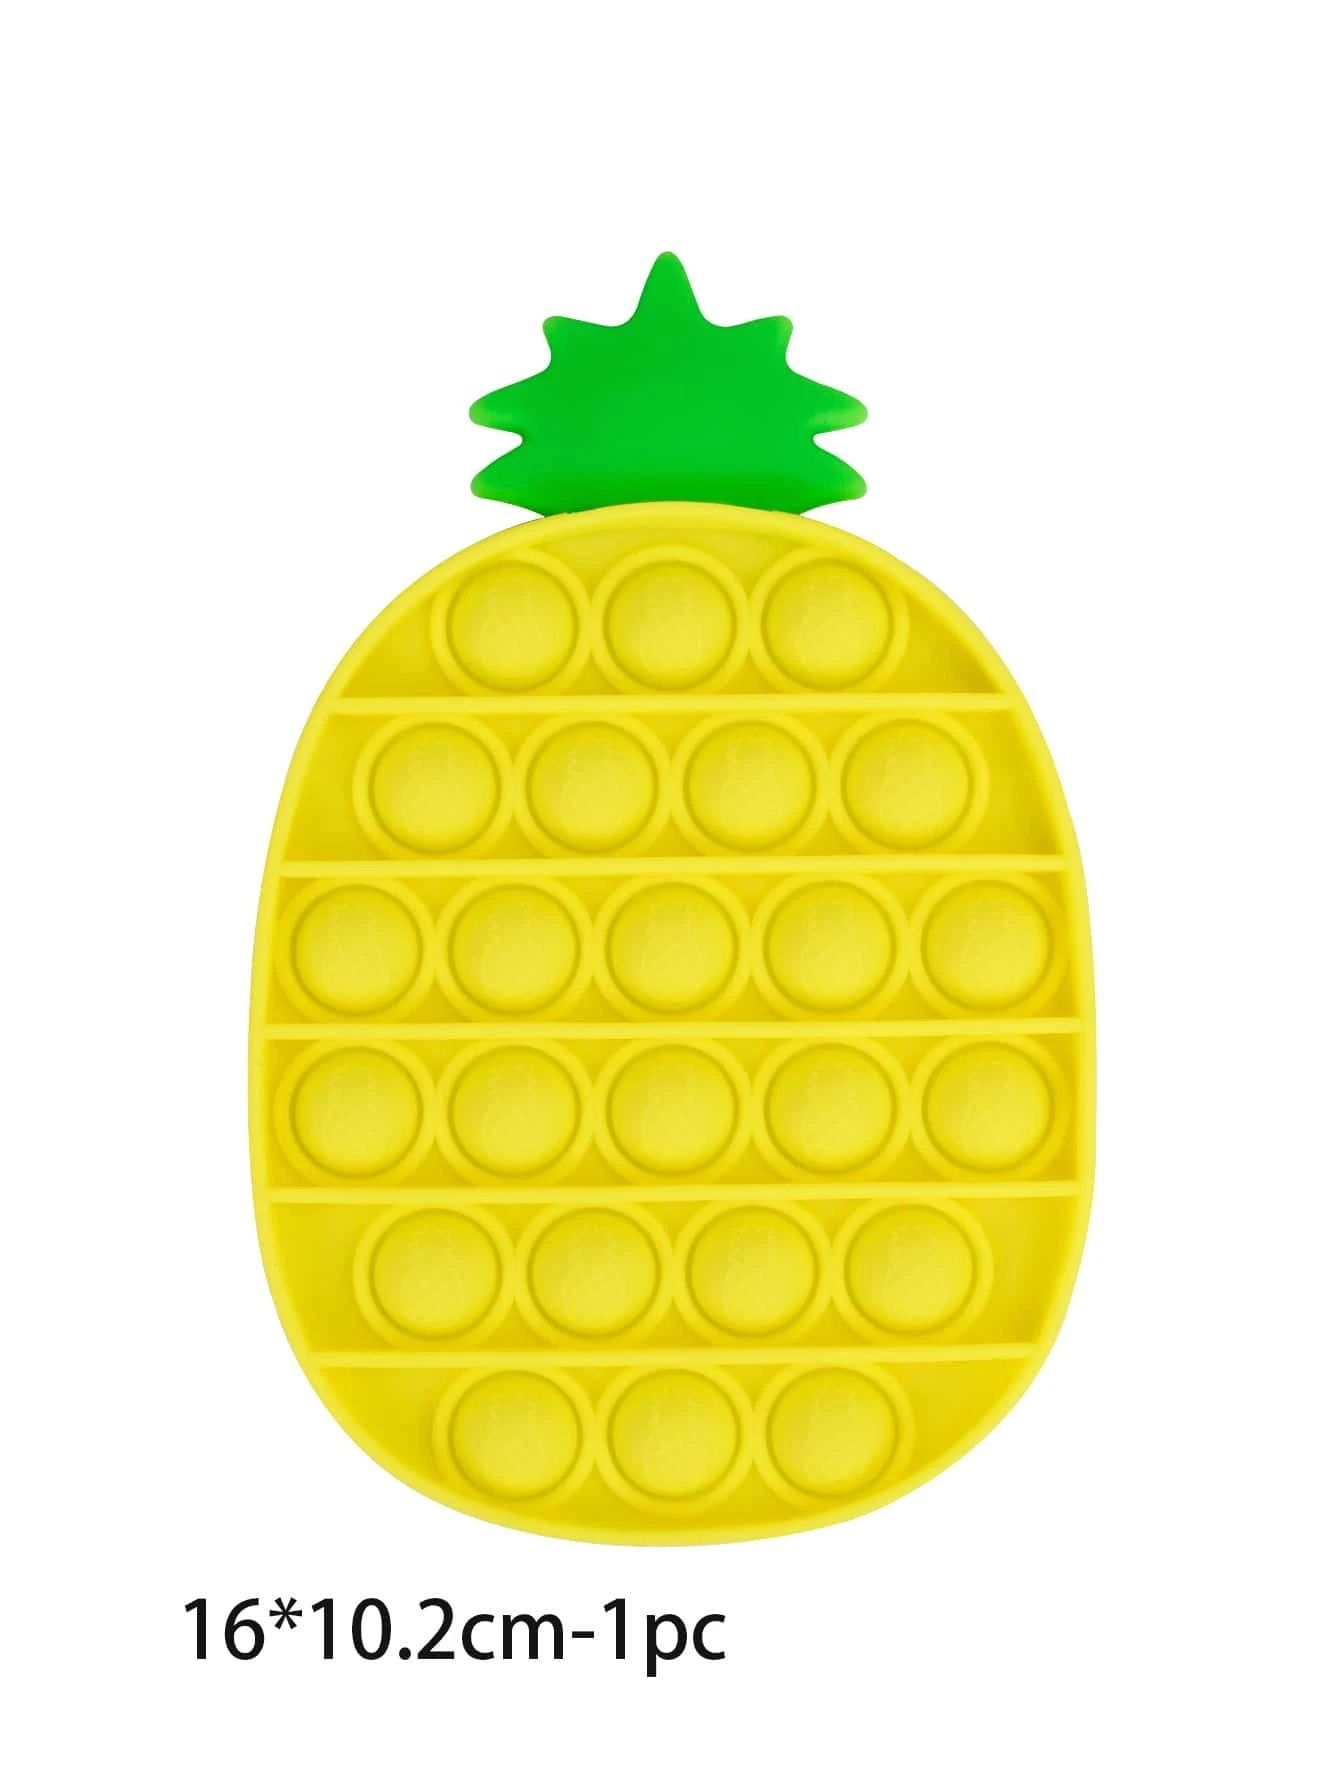 1pc Pineapple Shaped Push Bubble Toy | SHEIN